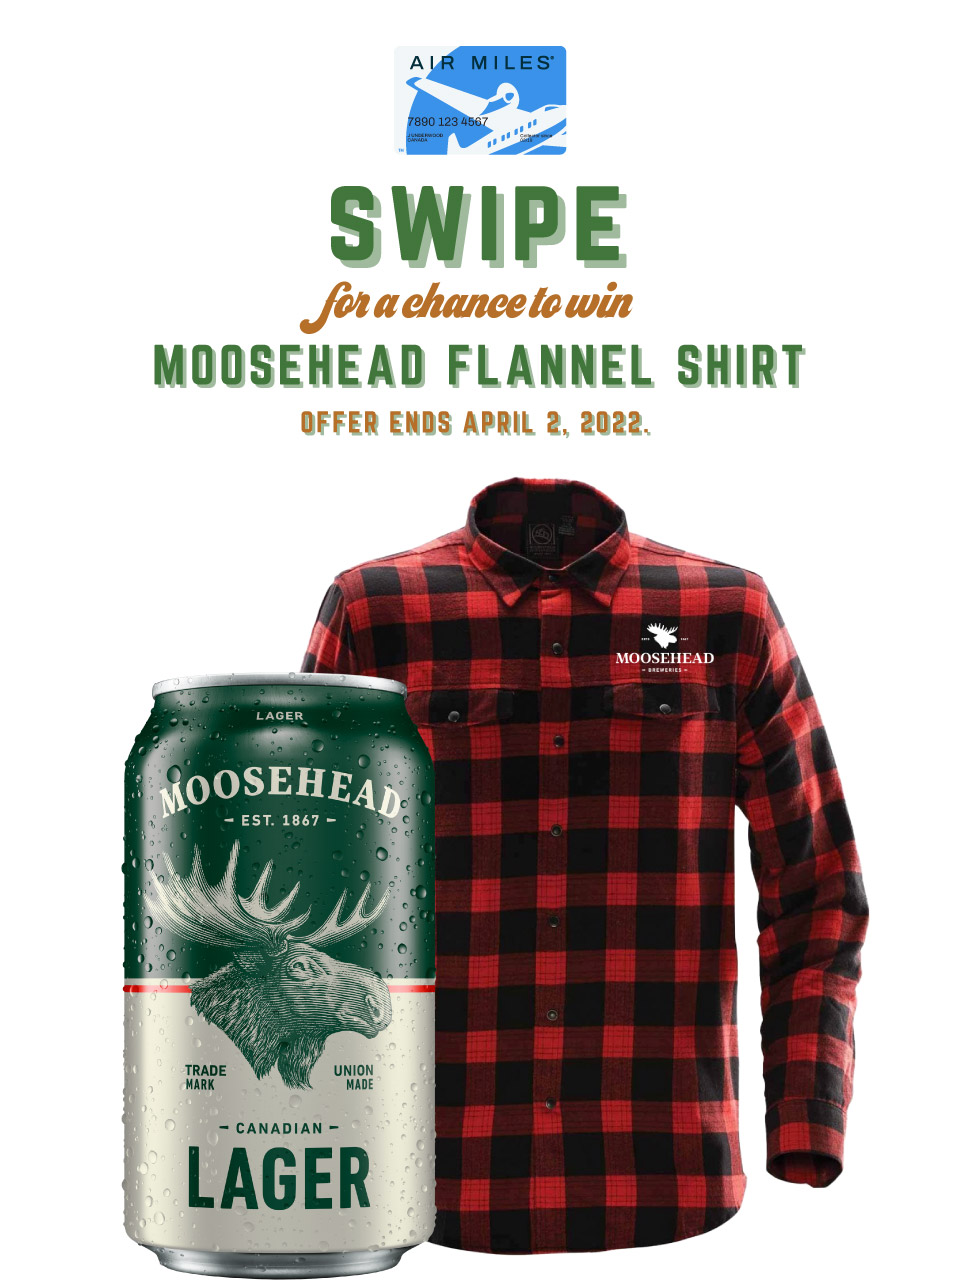 Moosehead Lager 12 Pack Cans